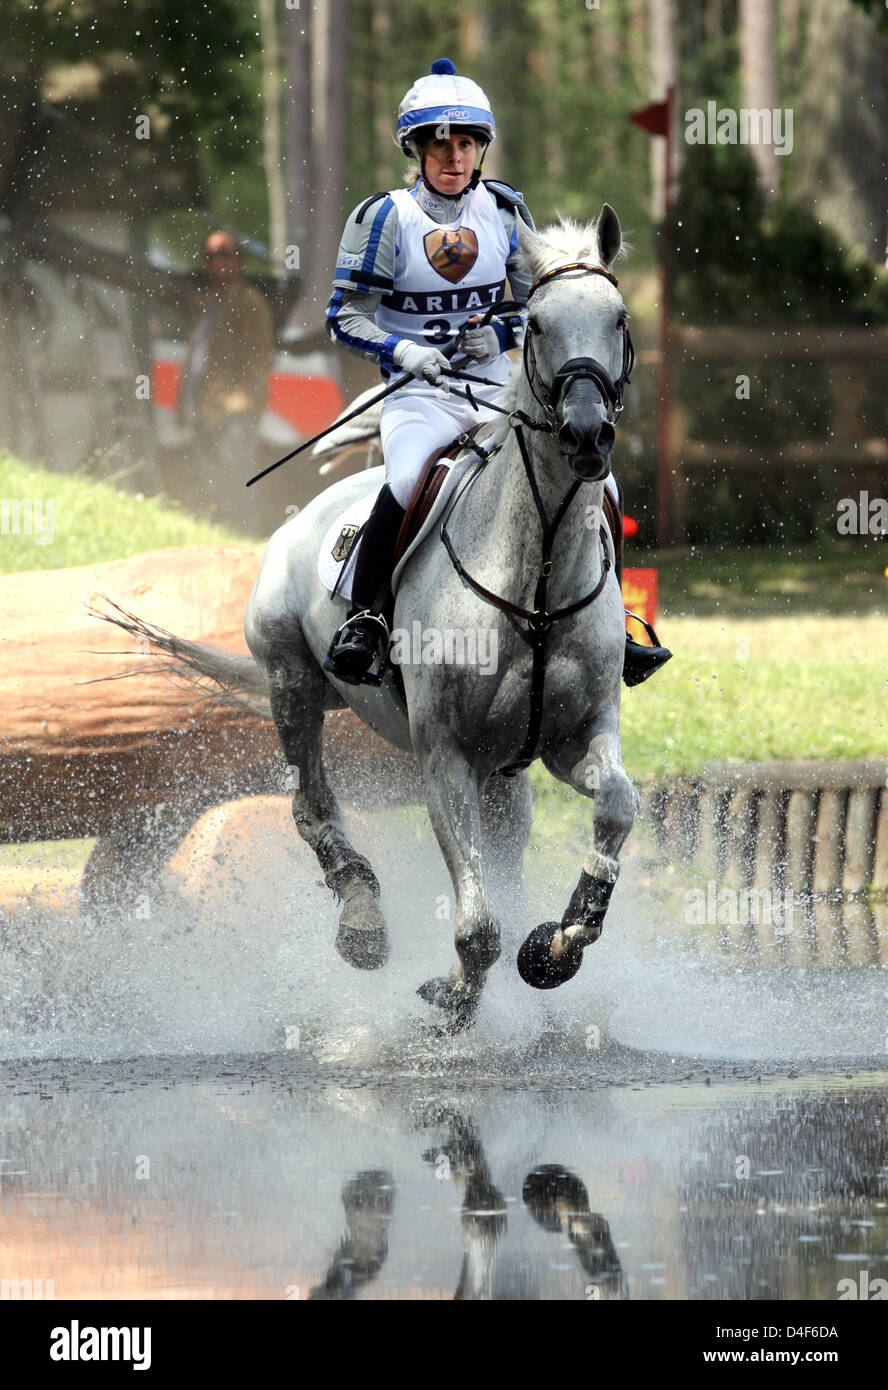 German Bettina Hoy and her horse Ringwood Cockatoo are pictured during the terrain exercise of the International eventing tournament in Luhmuehlen, Germany, 14 June 2008. Photo: KAY NIETFELD Stock Photo